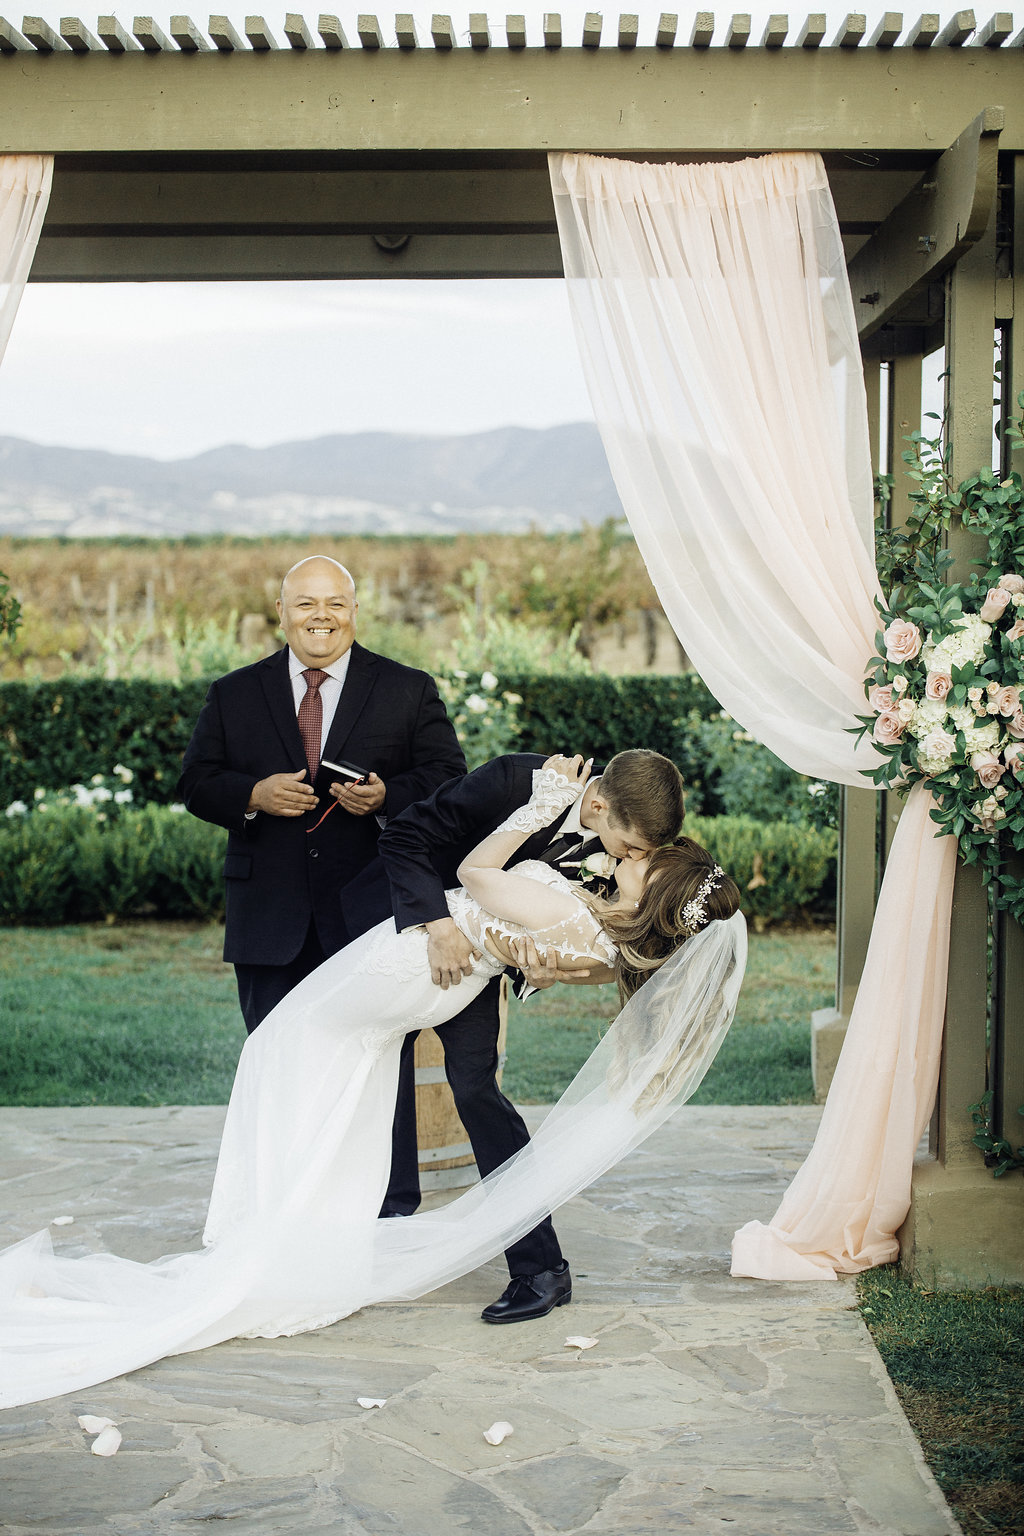 Wedding Photograph Of Pastor Smiling To Bride And Groom Bending While Kissing Los Angeles